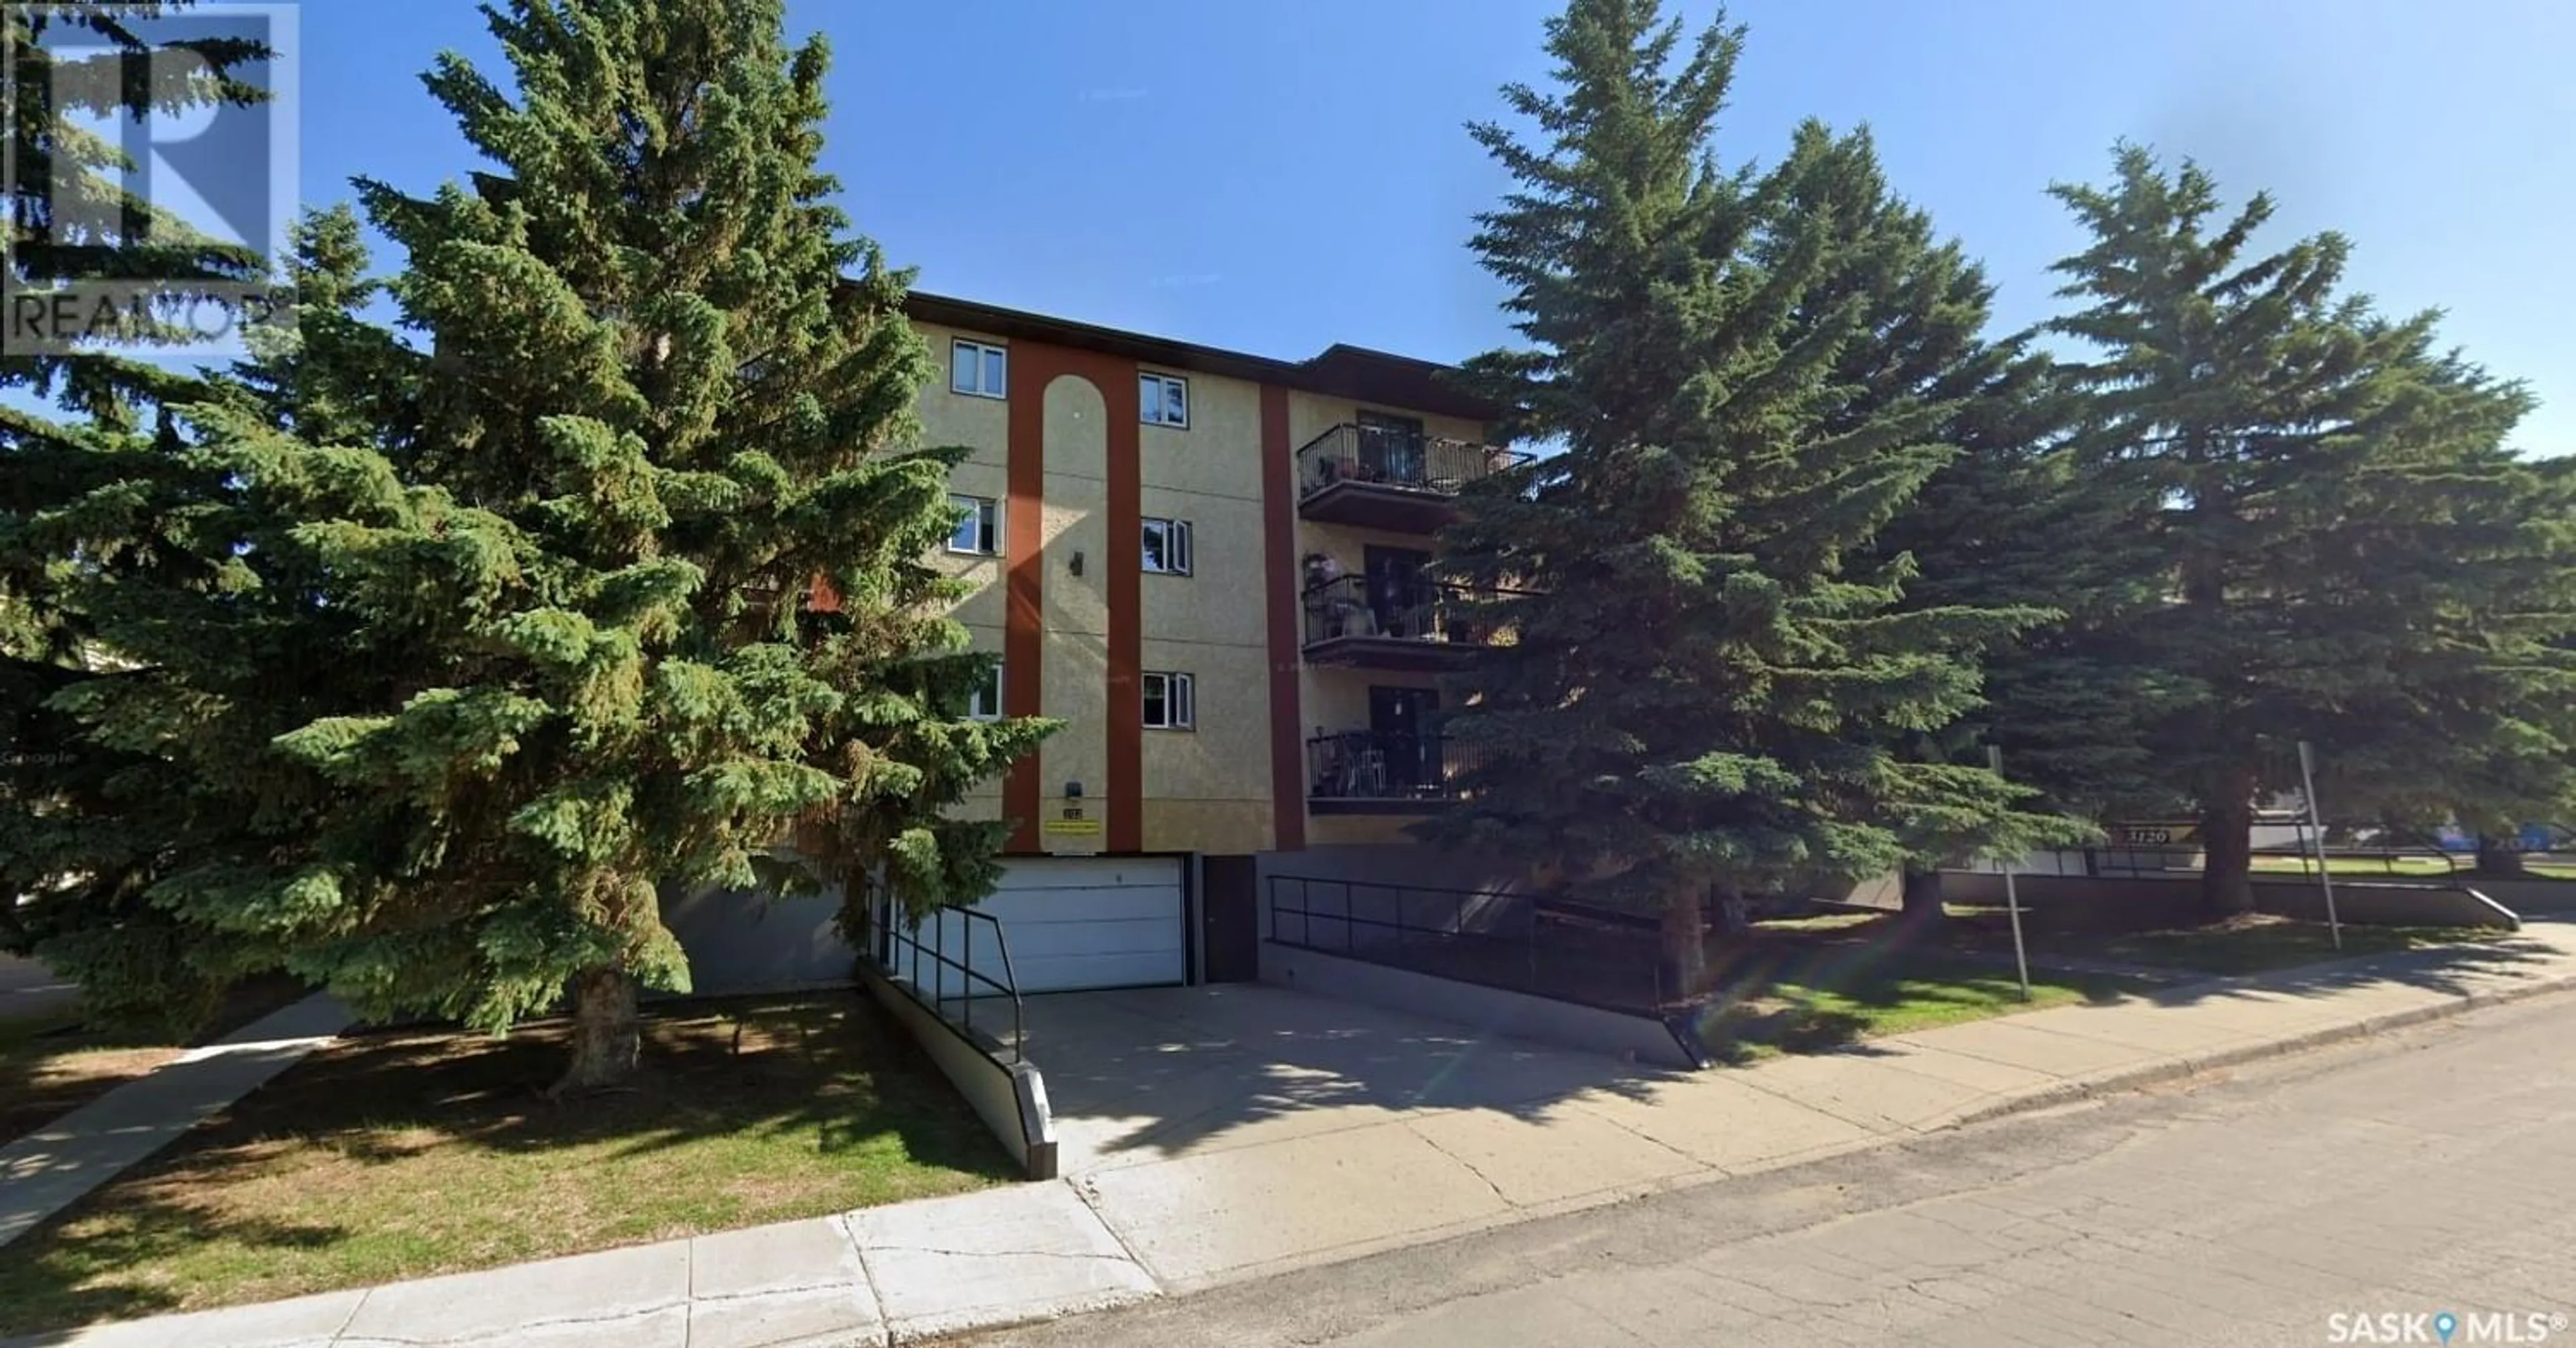 A pic from exterior of the house or condo for 303 3120 Louise STREET, Saskatoon Saskatchewan S7J3L8